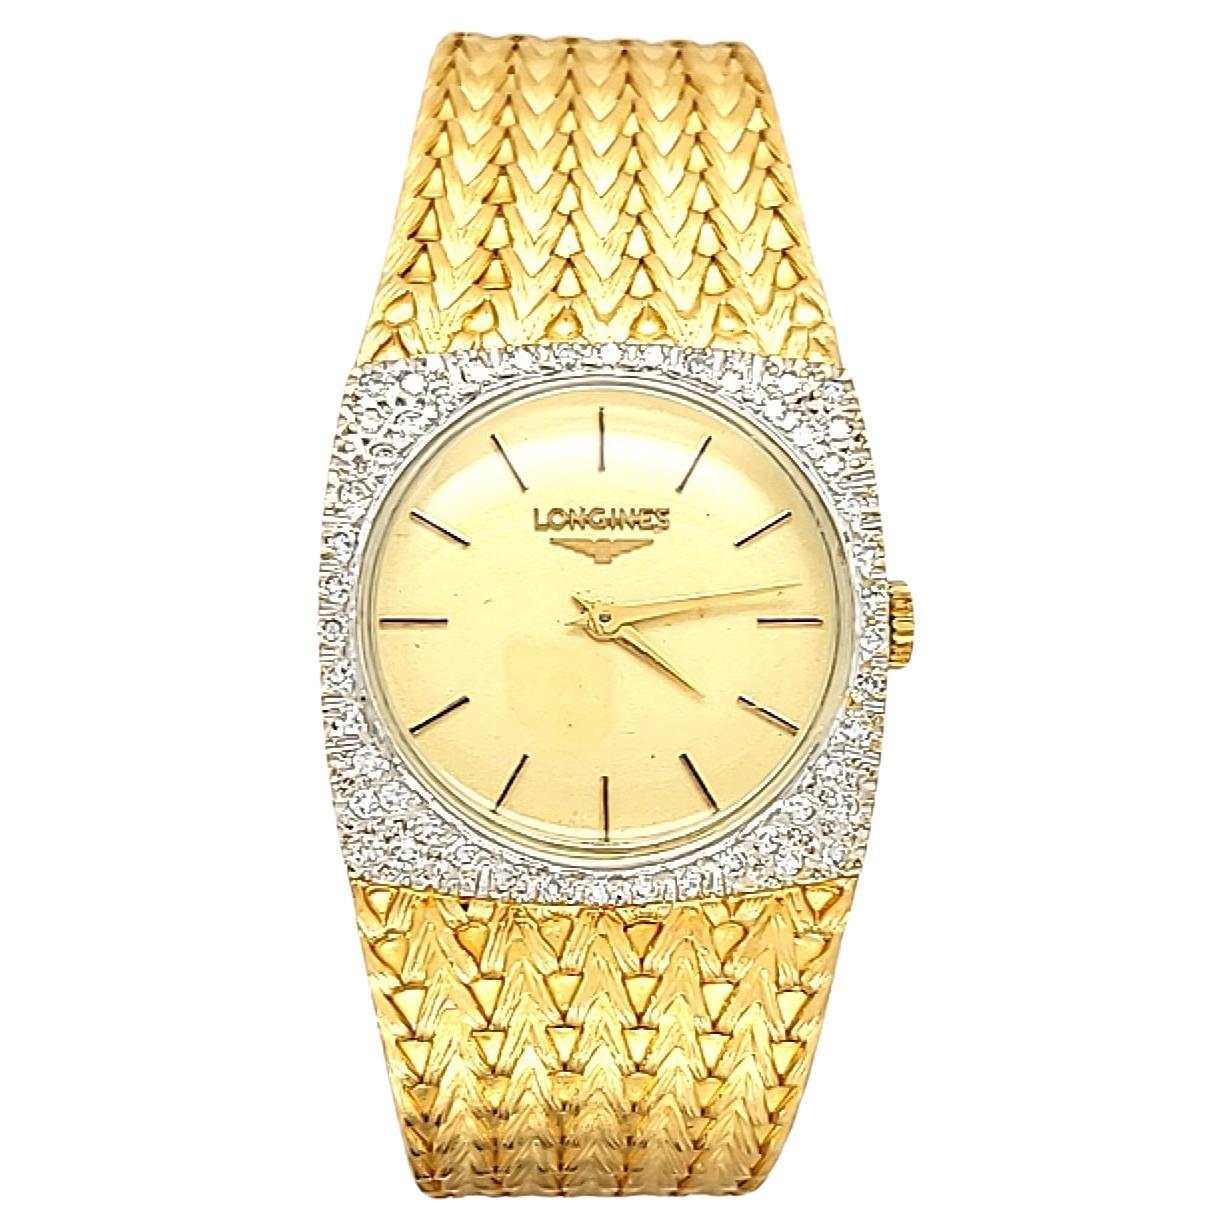 Vintage Longines Solid 14K Gold and Diamond Watch- Unisex For Sale